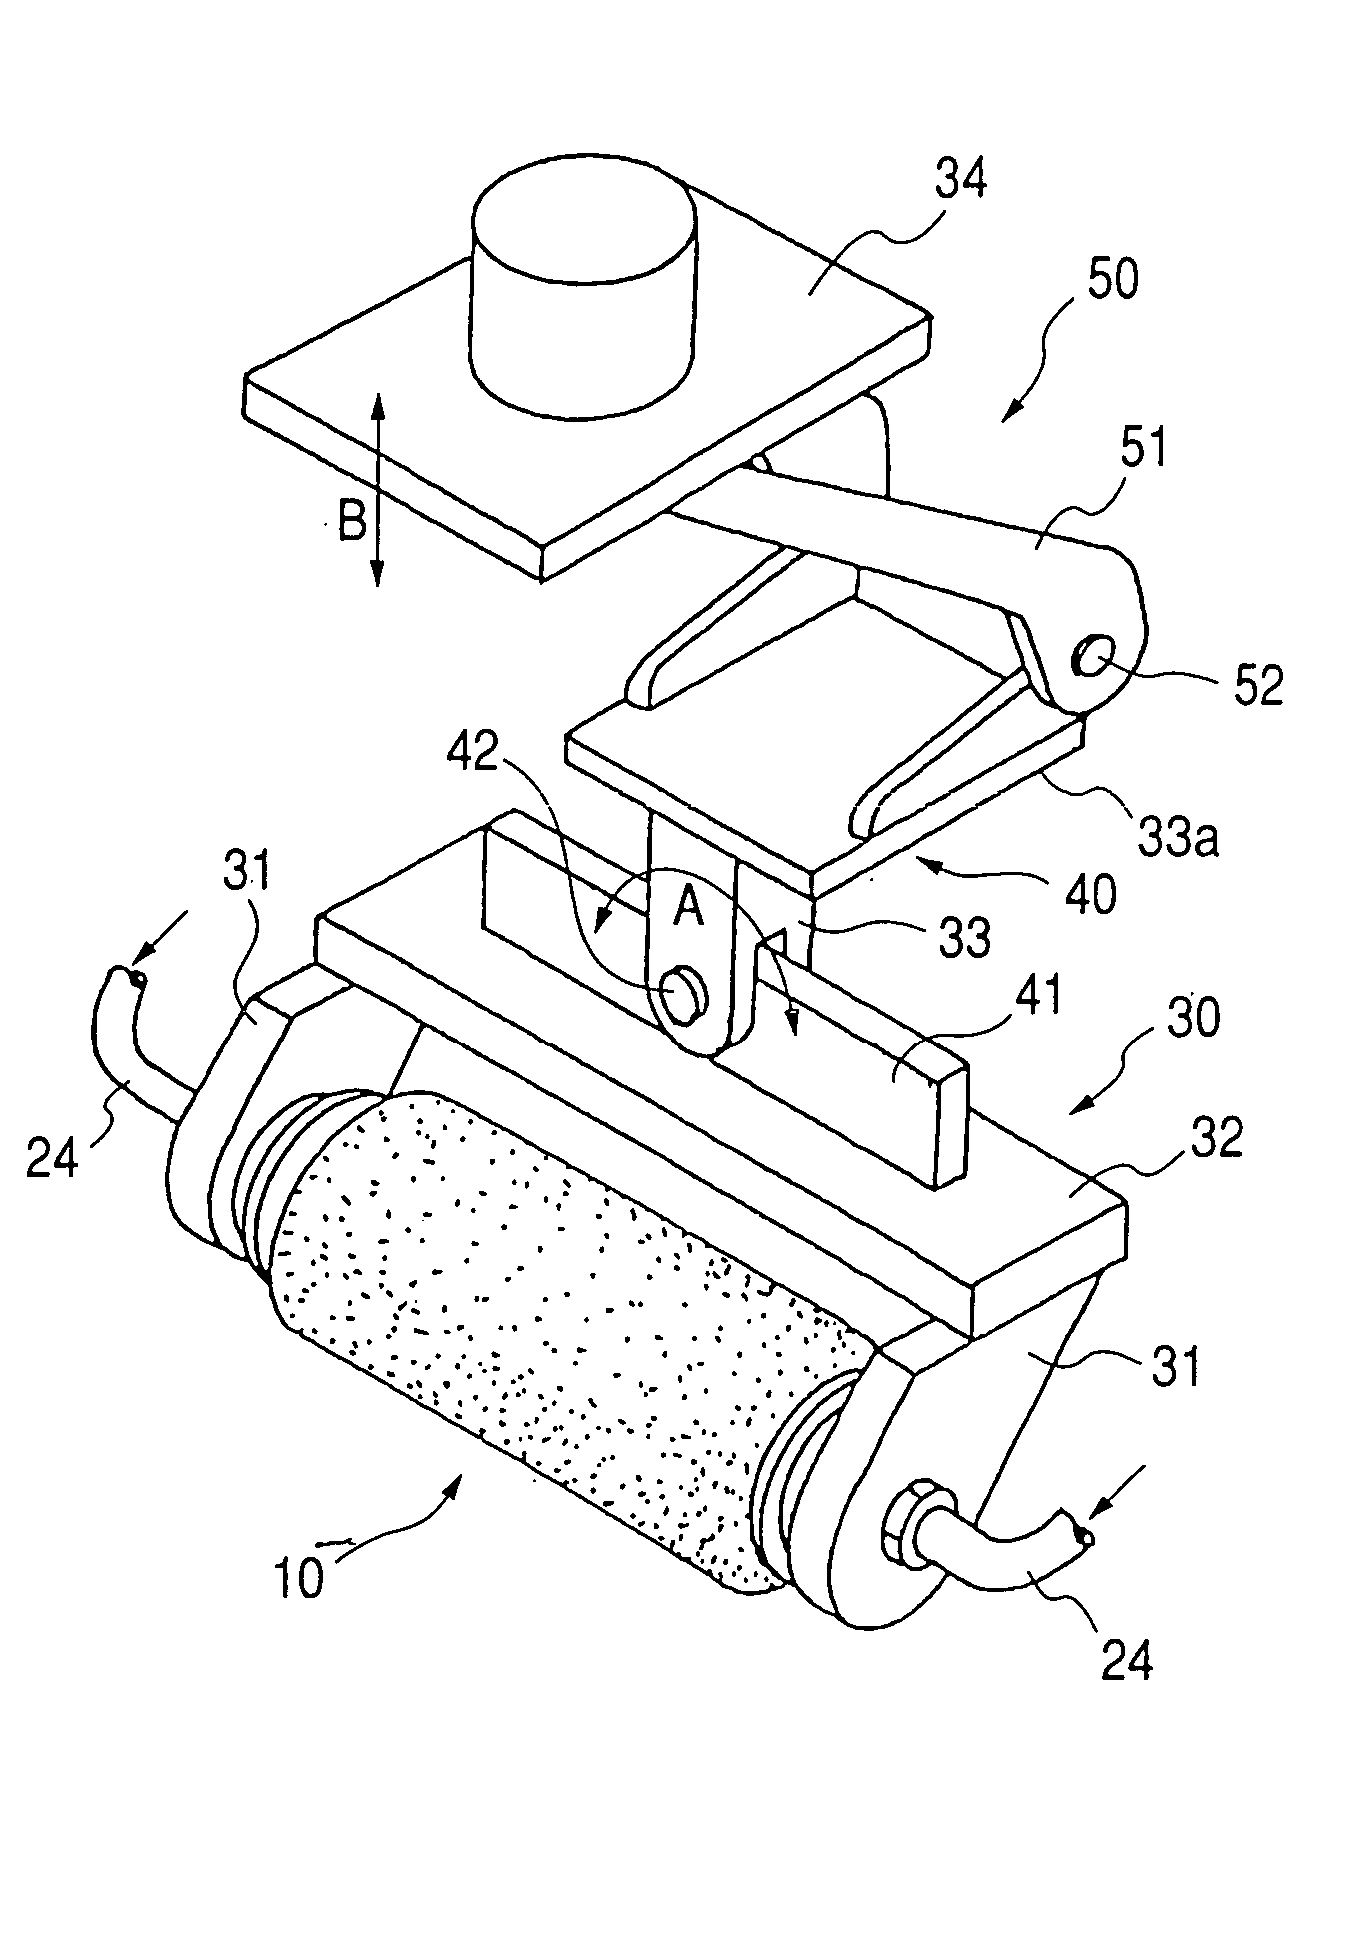 Pressure fed coating roller, roller coating device, automated coating apparatus using this device